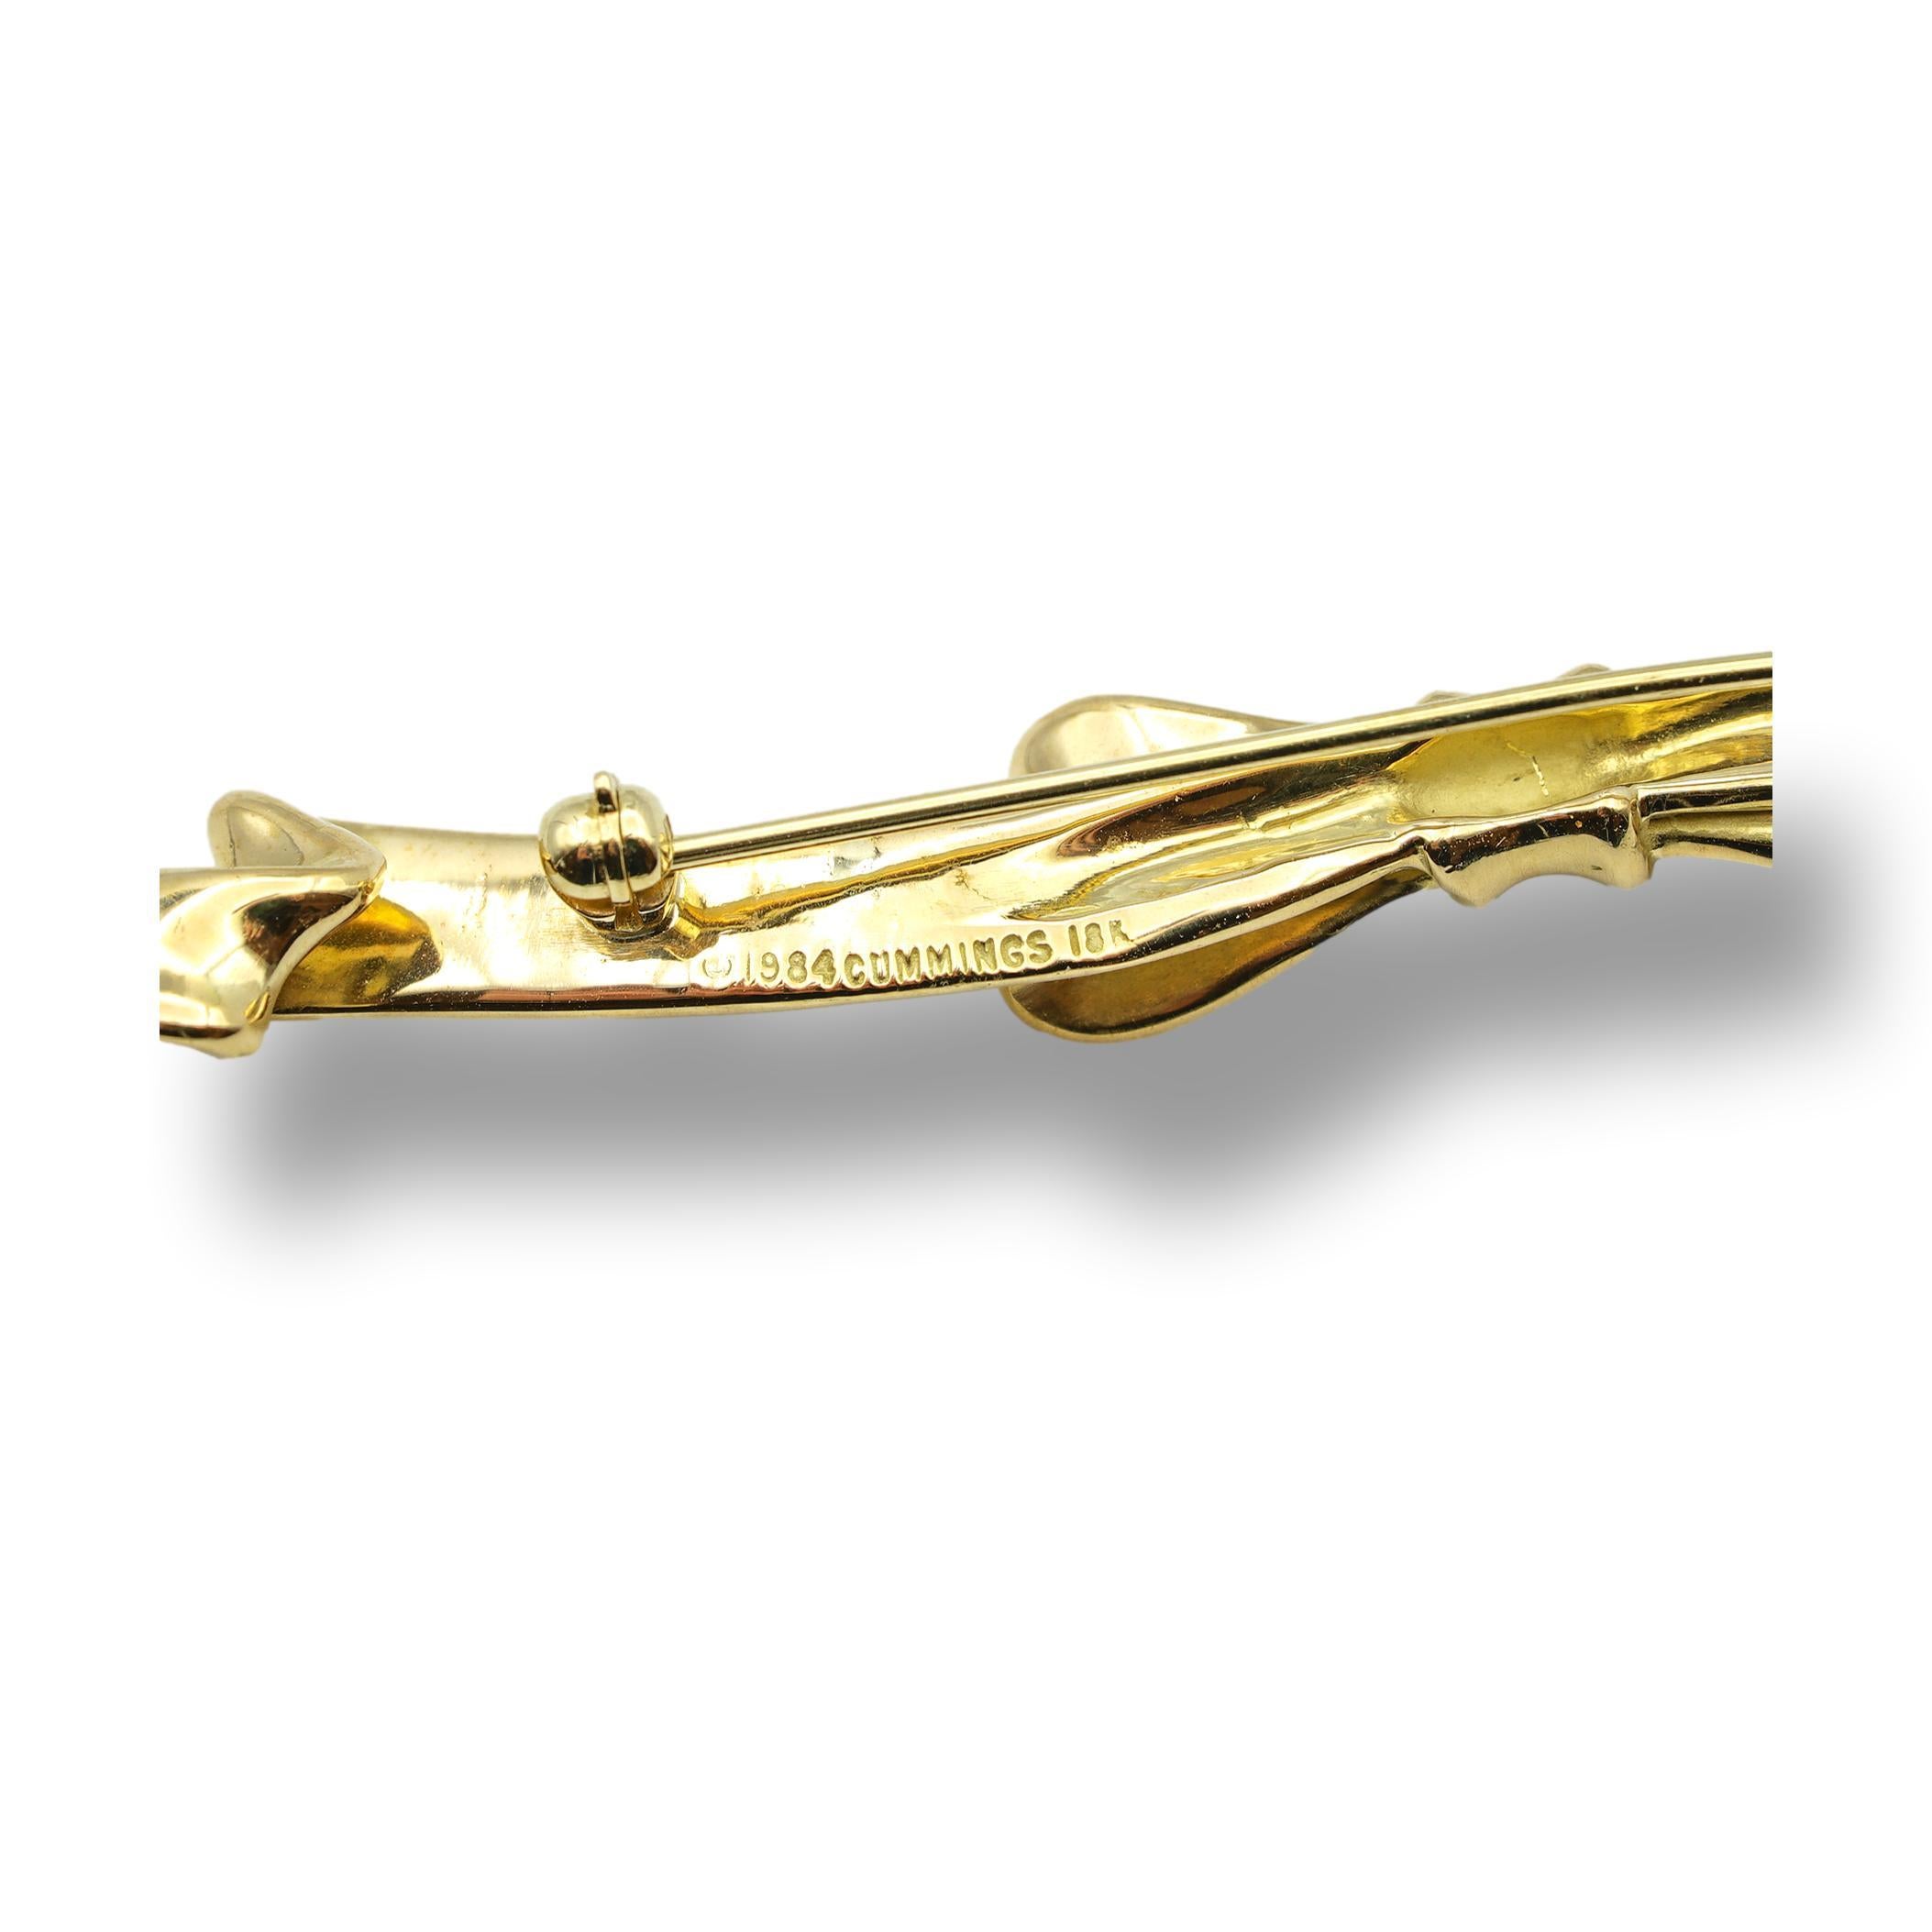 Vintage 18 Karat Gold Bow pin designed by Angela Cummings from her 1984 collection. Front of the pin has a satin finish and the back has a high polished gold finish. This pin has a nice substantial heft to it, with a very silky feel. Fully